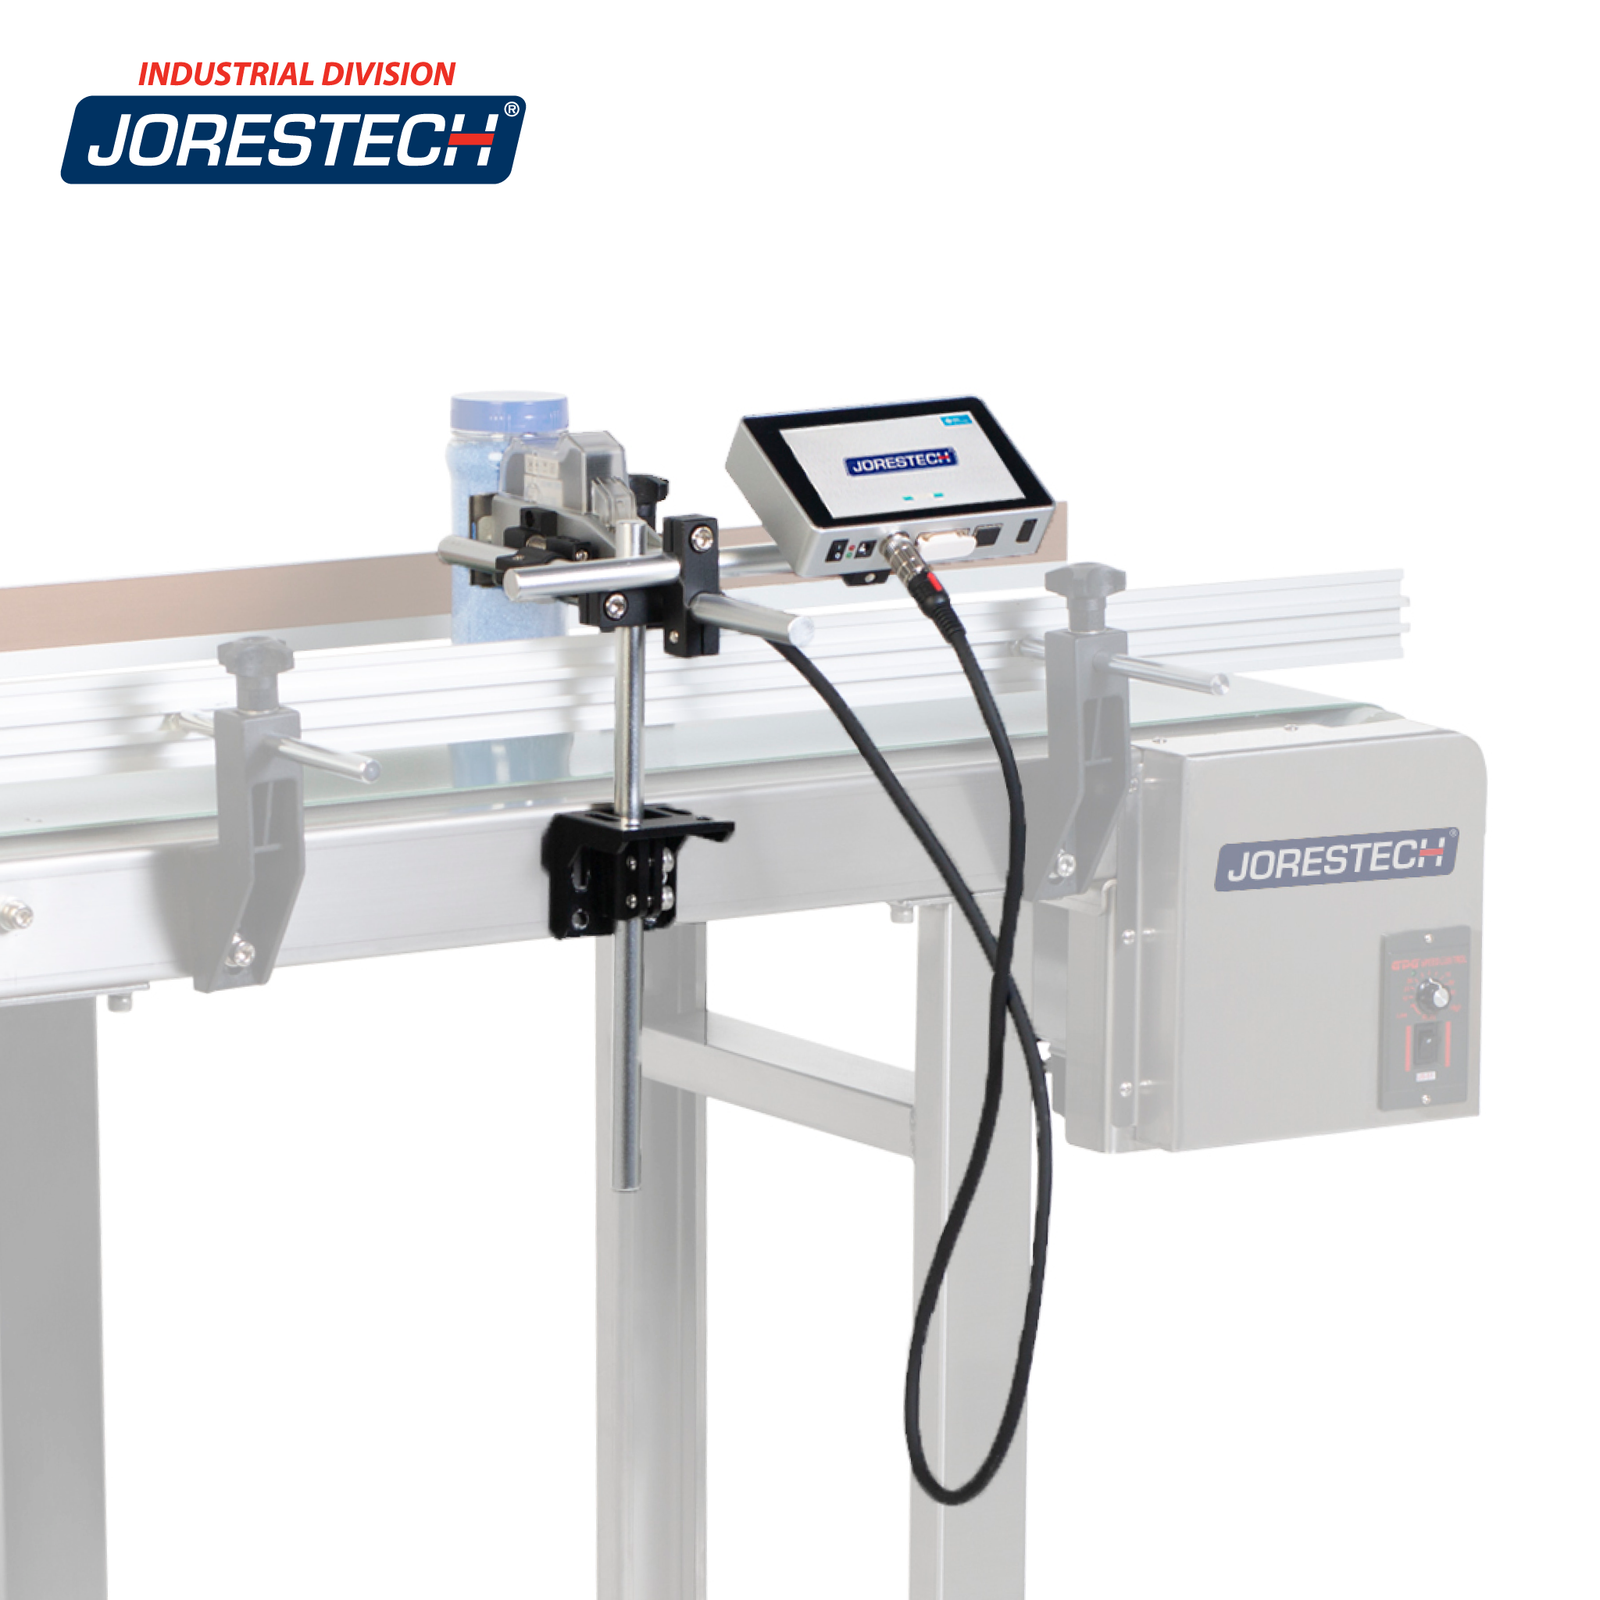 The JORESTECH TIJ inkjet coder installed on a motorized conveyor. There is a plastic container passing in front of the printing head and an inkjet cartridge installed in the machine. The digital touchscreen control panel of the coder is turned on